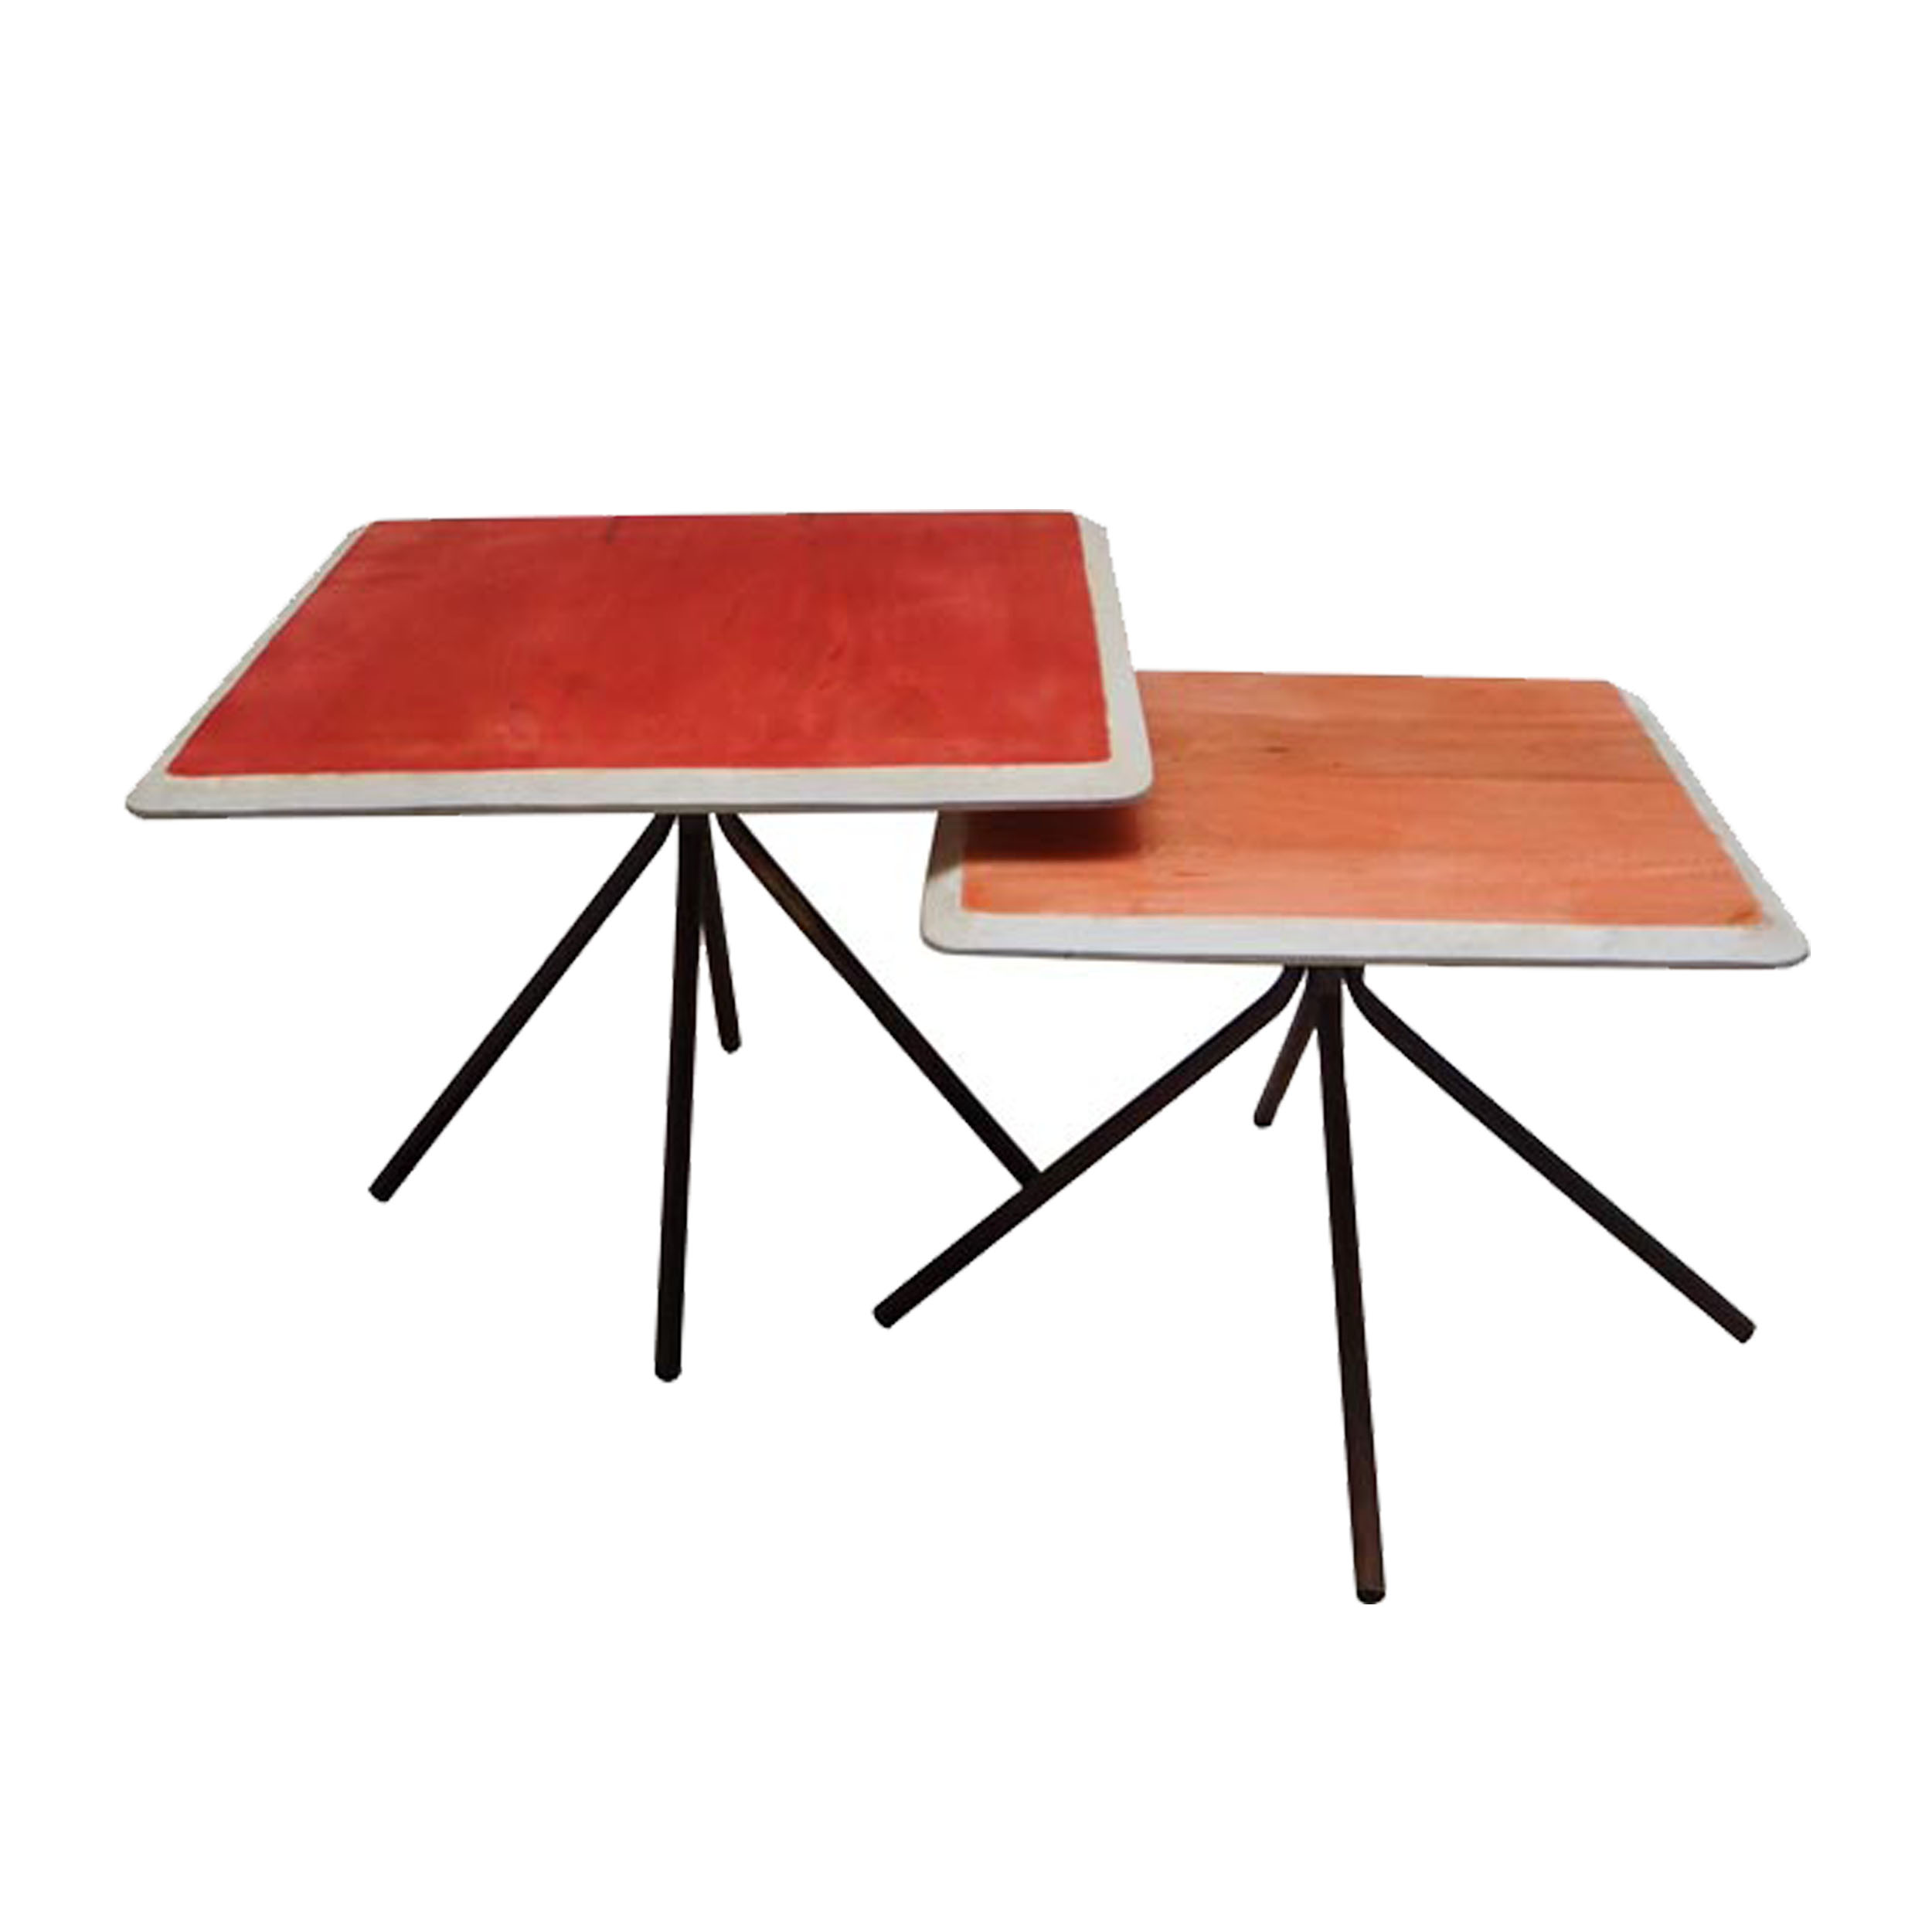 Side Tables Muralla – Set of Two